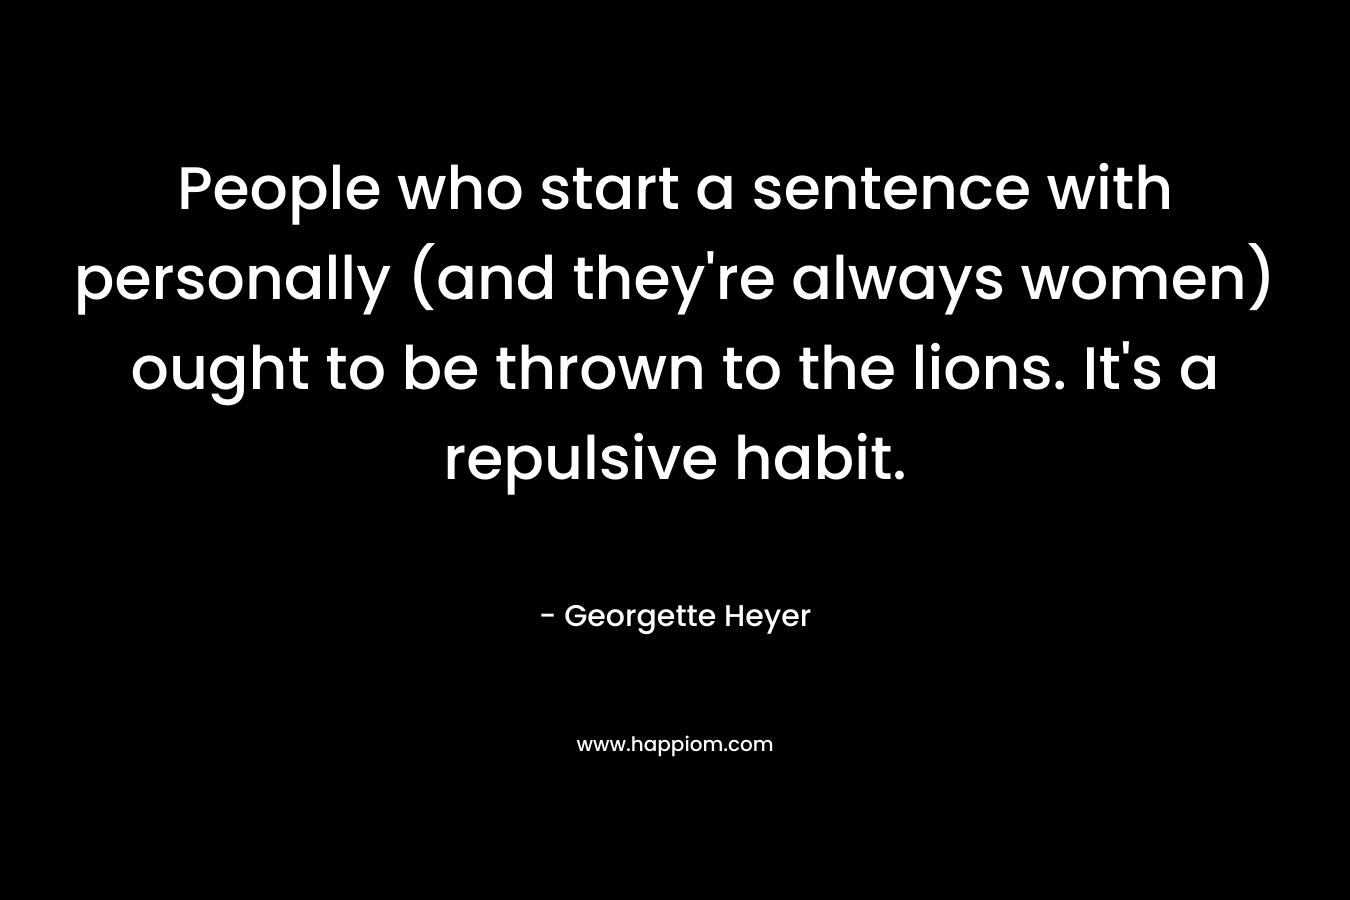 People who start a sentence with personally (and they’re always women) ought to be thrown to the lions. It’s a repulsive habit. – Georgette Heyer